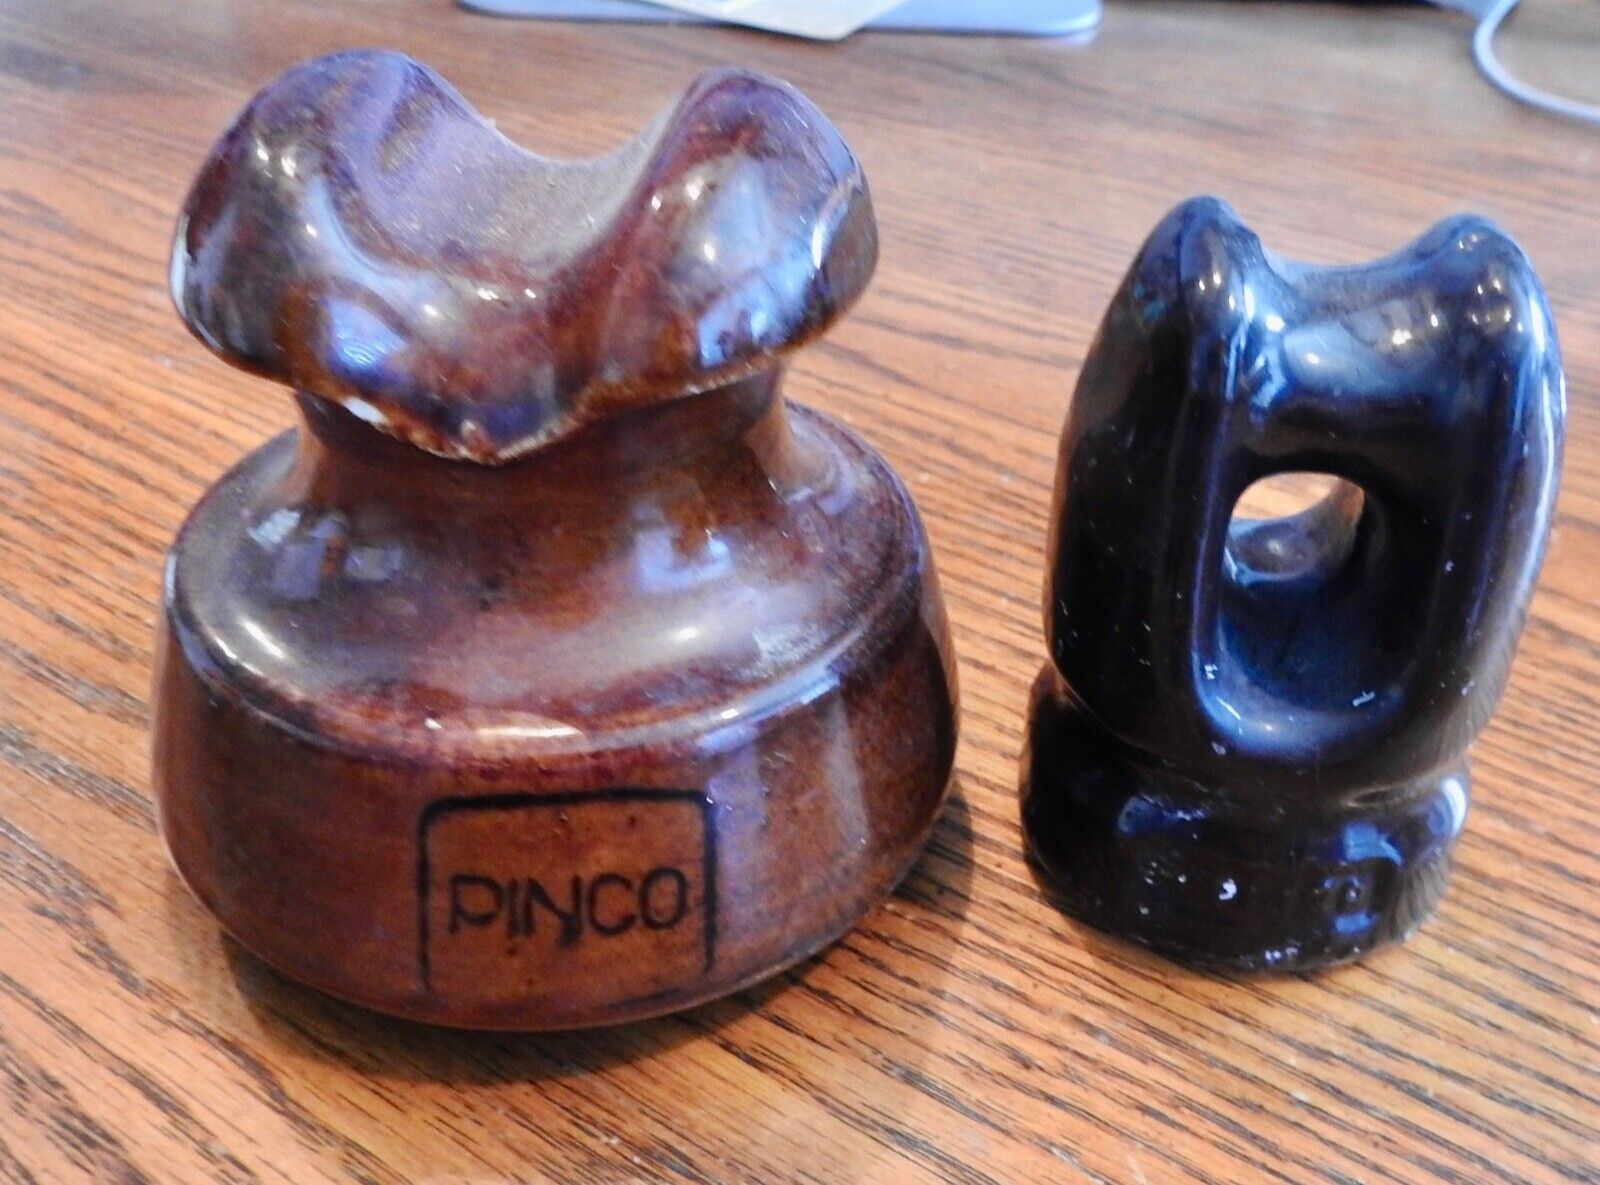 Pair of 2 vintage telephone insulators - Larger Pinco and smaller one